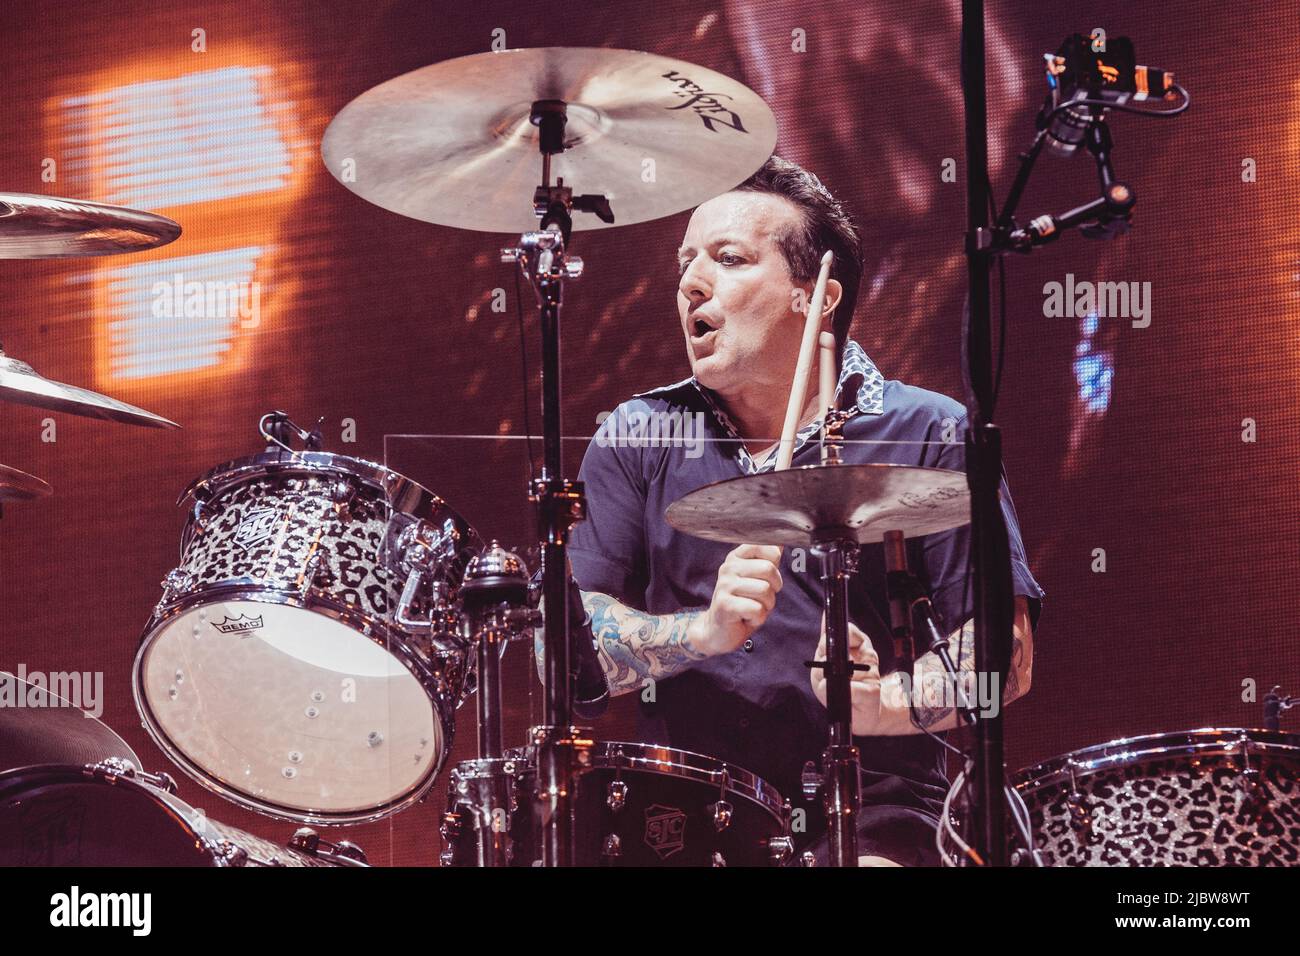 Copenhagen, Denmark. 07th, June 2022. The American rock band Green Day performs a live concert at Forum at Frederiksberg, Copenhagen. Here drummer Tre Cool is seen live on stage. (Photo credit: Gonzales Photo - Thomas Rungstrom). Stock Photo